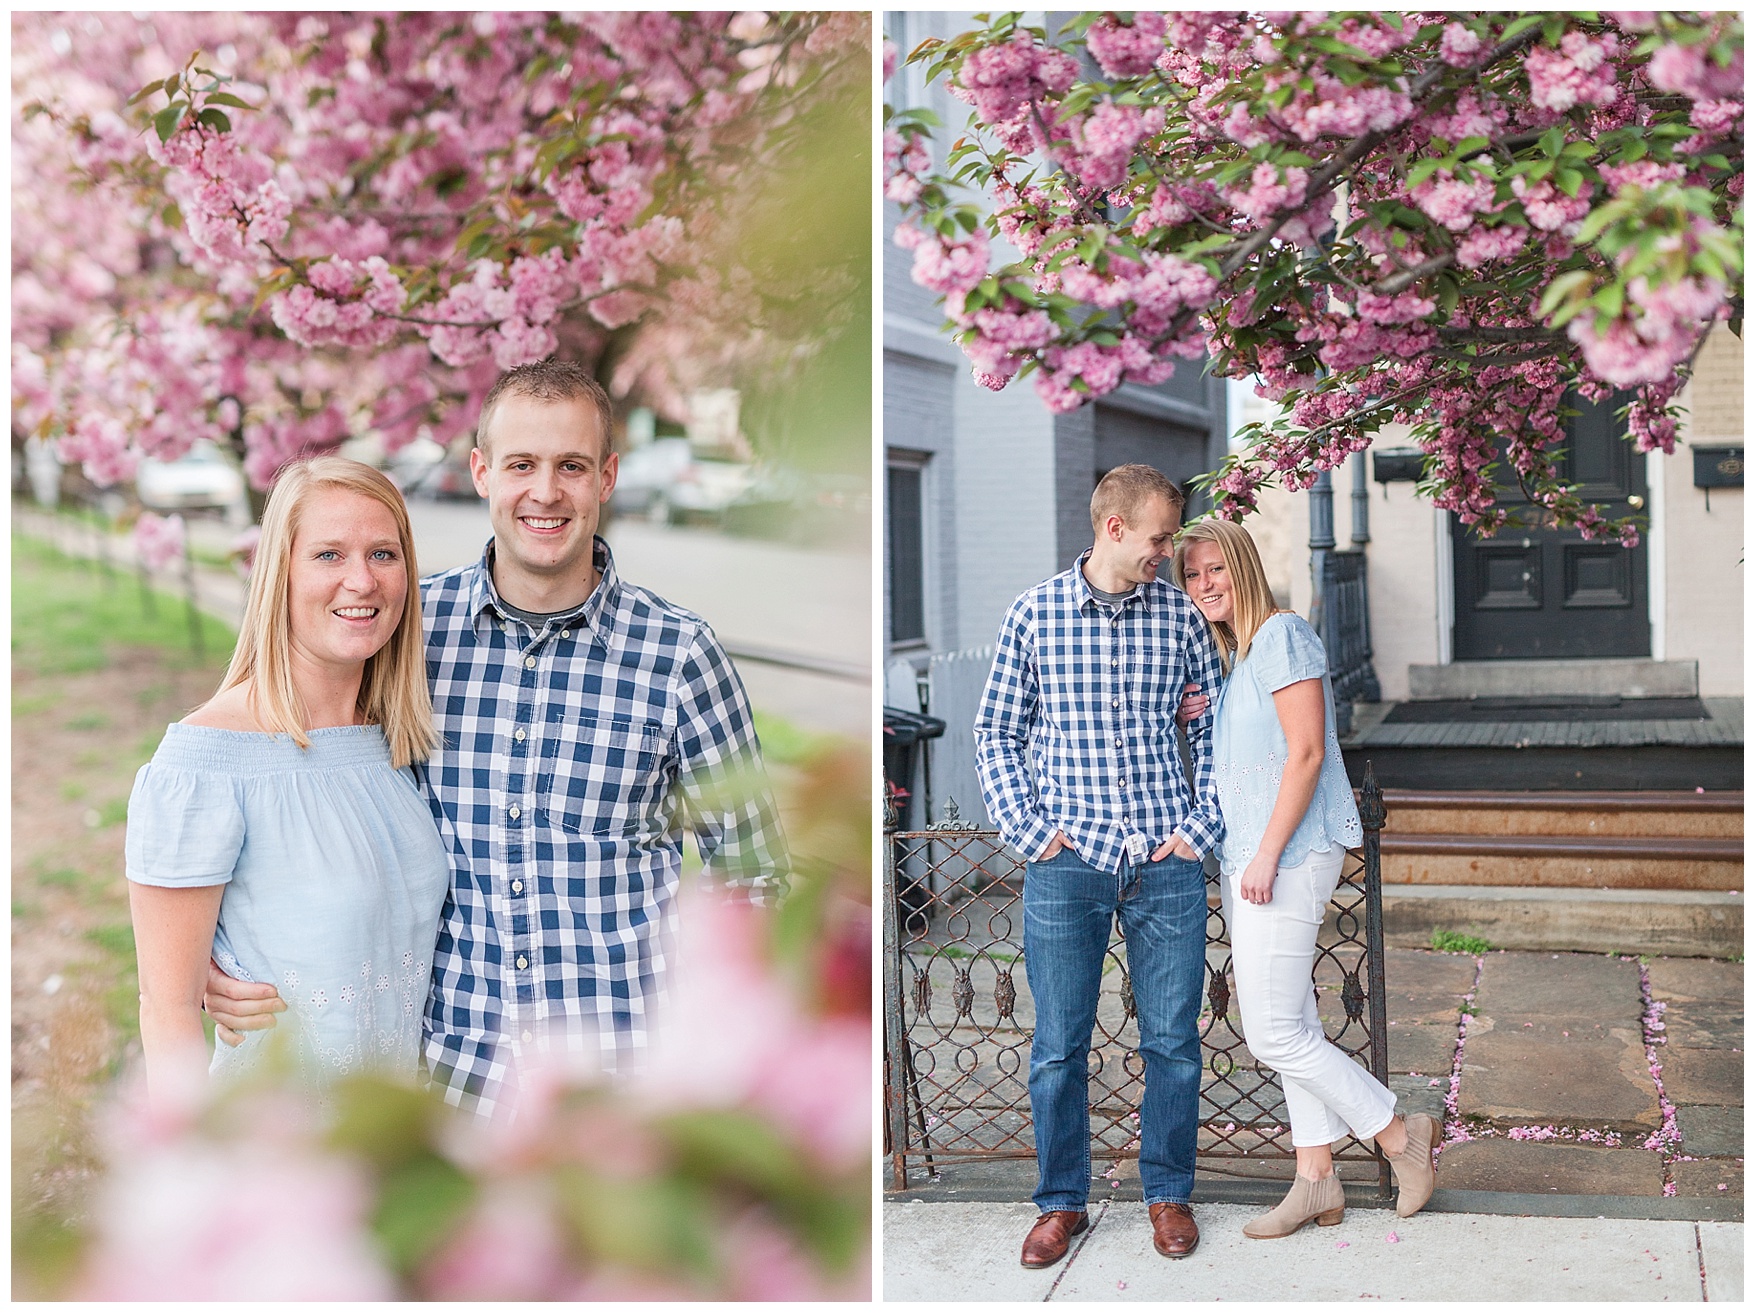 Downtown Lynchburg Engagement Session || Spring Bloom Engagement || Ashley Eiban Photography 